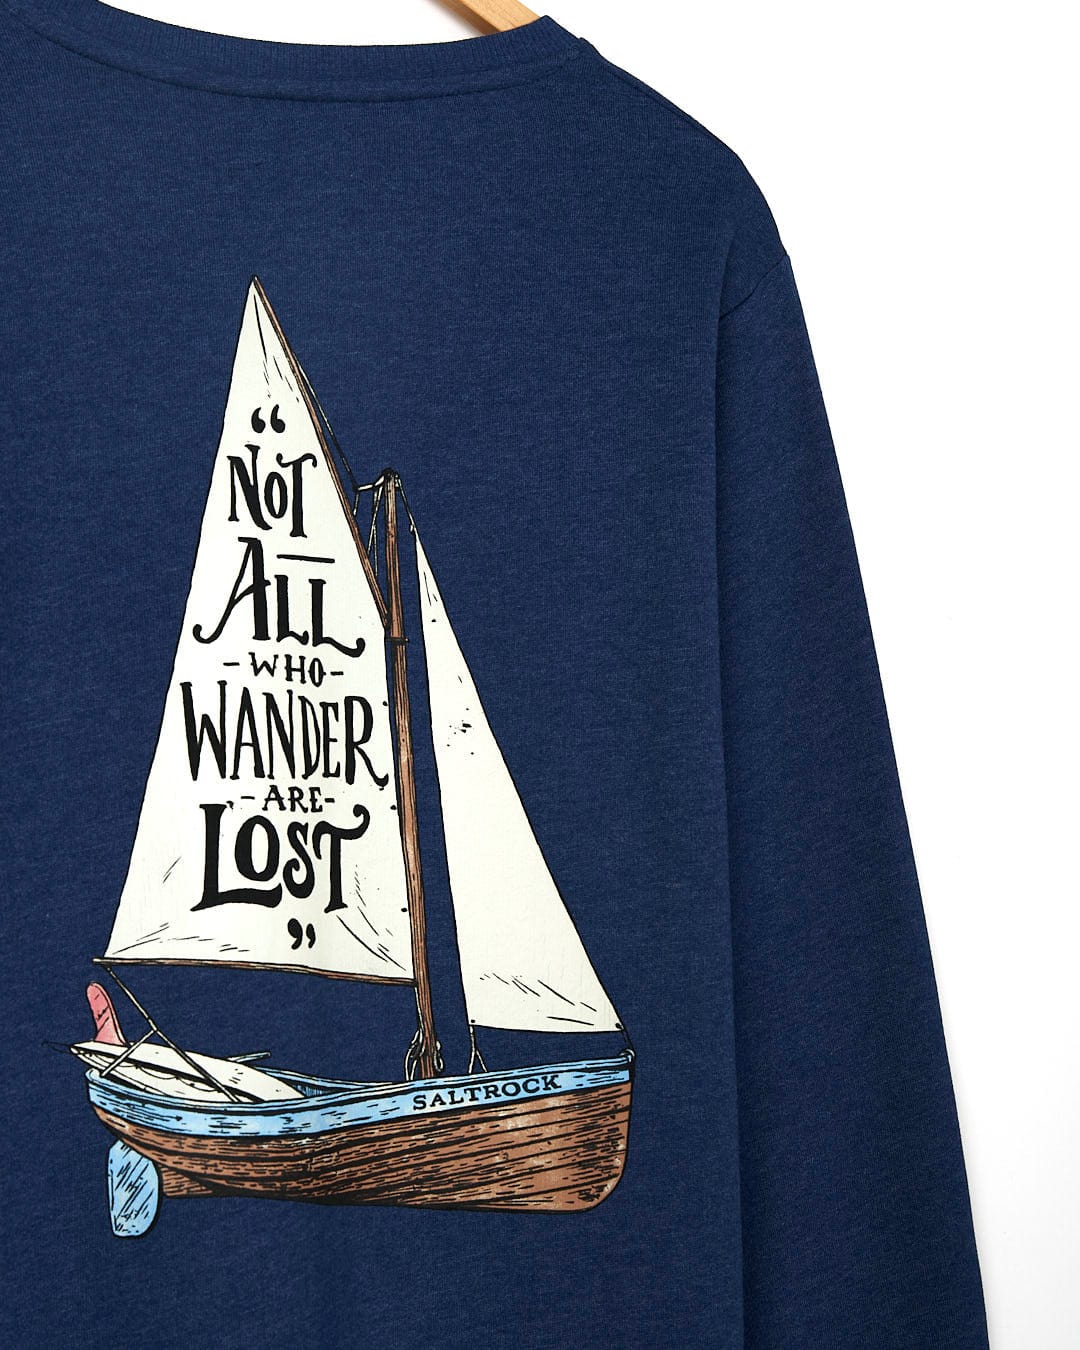 A Lost Ships - Mens Crew Sweat - Dark Blue with a sailboat on it that says not all wanderers are lost.